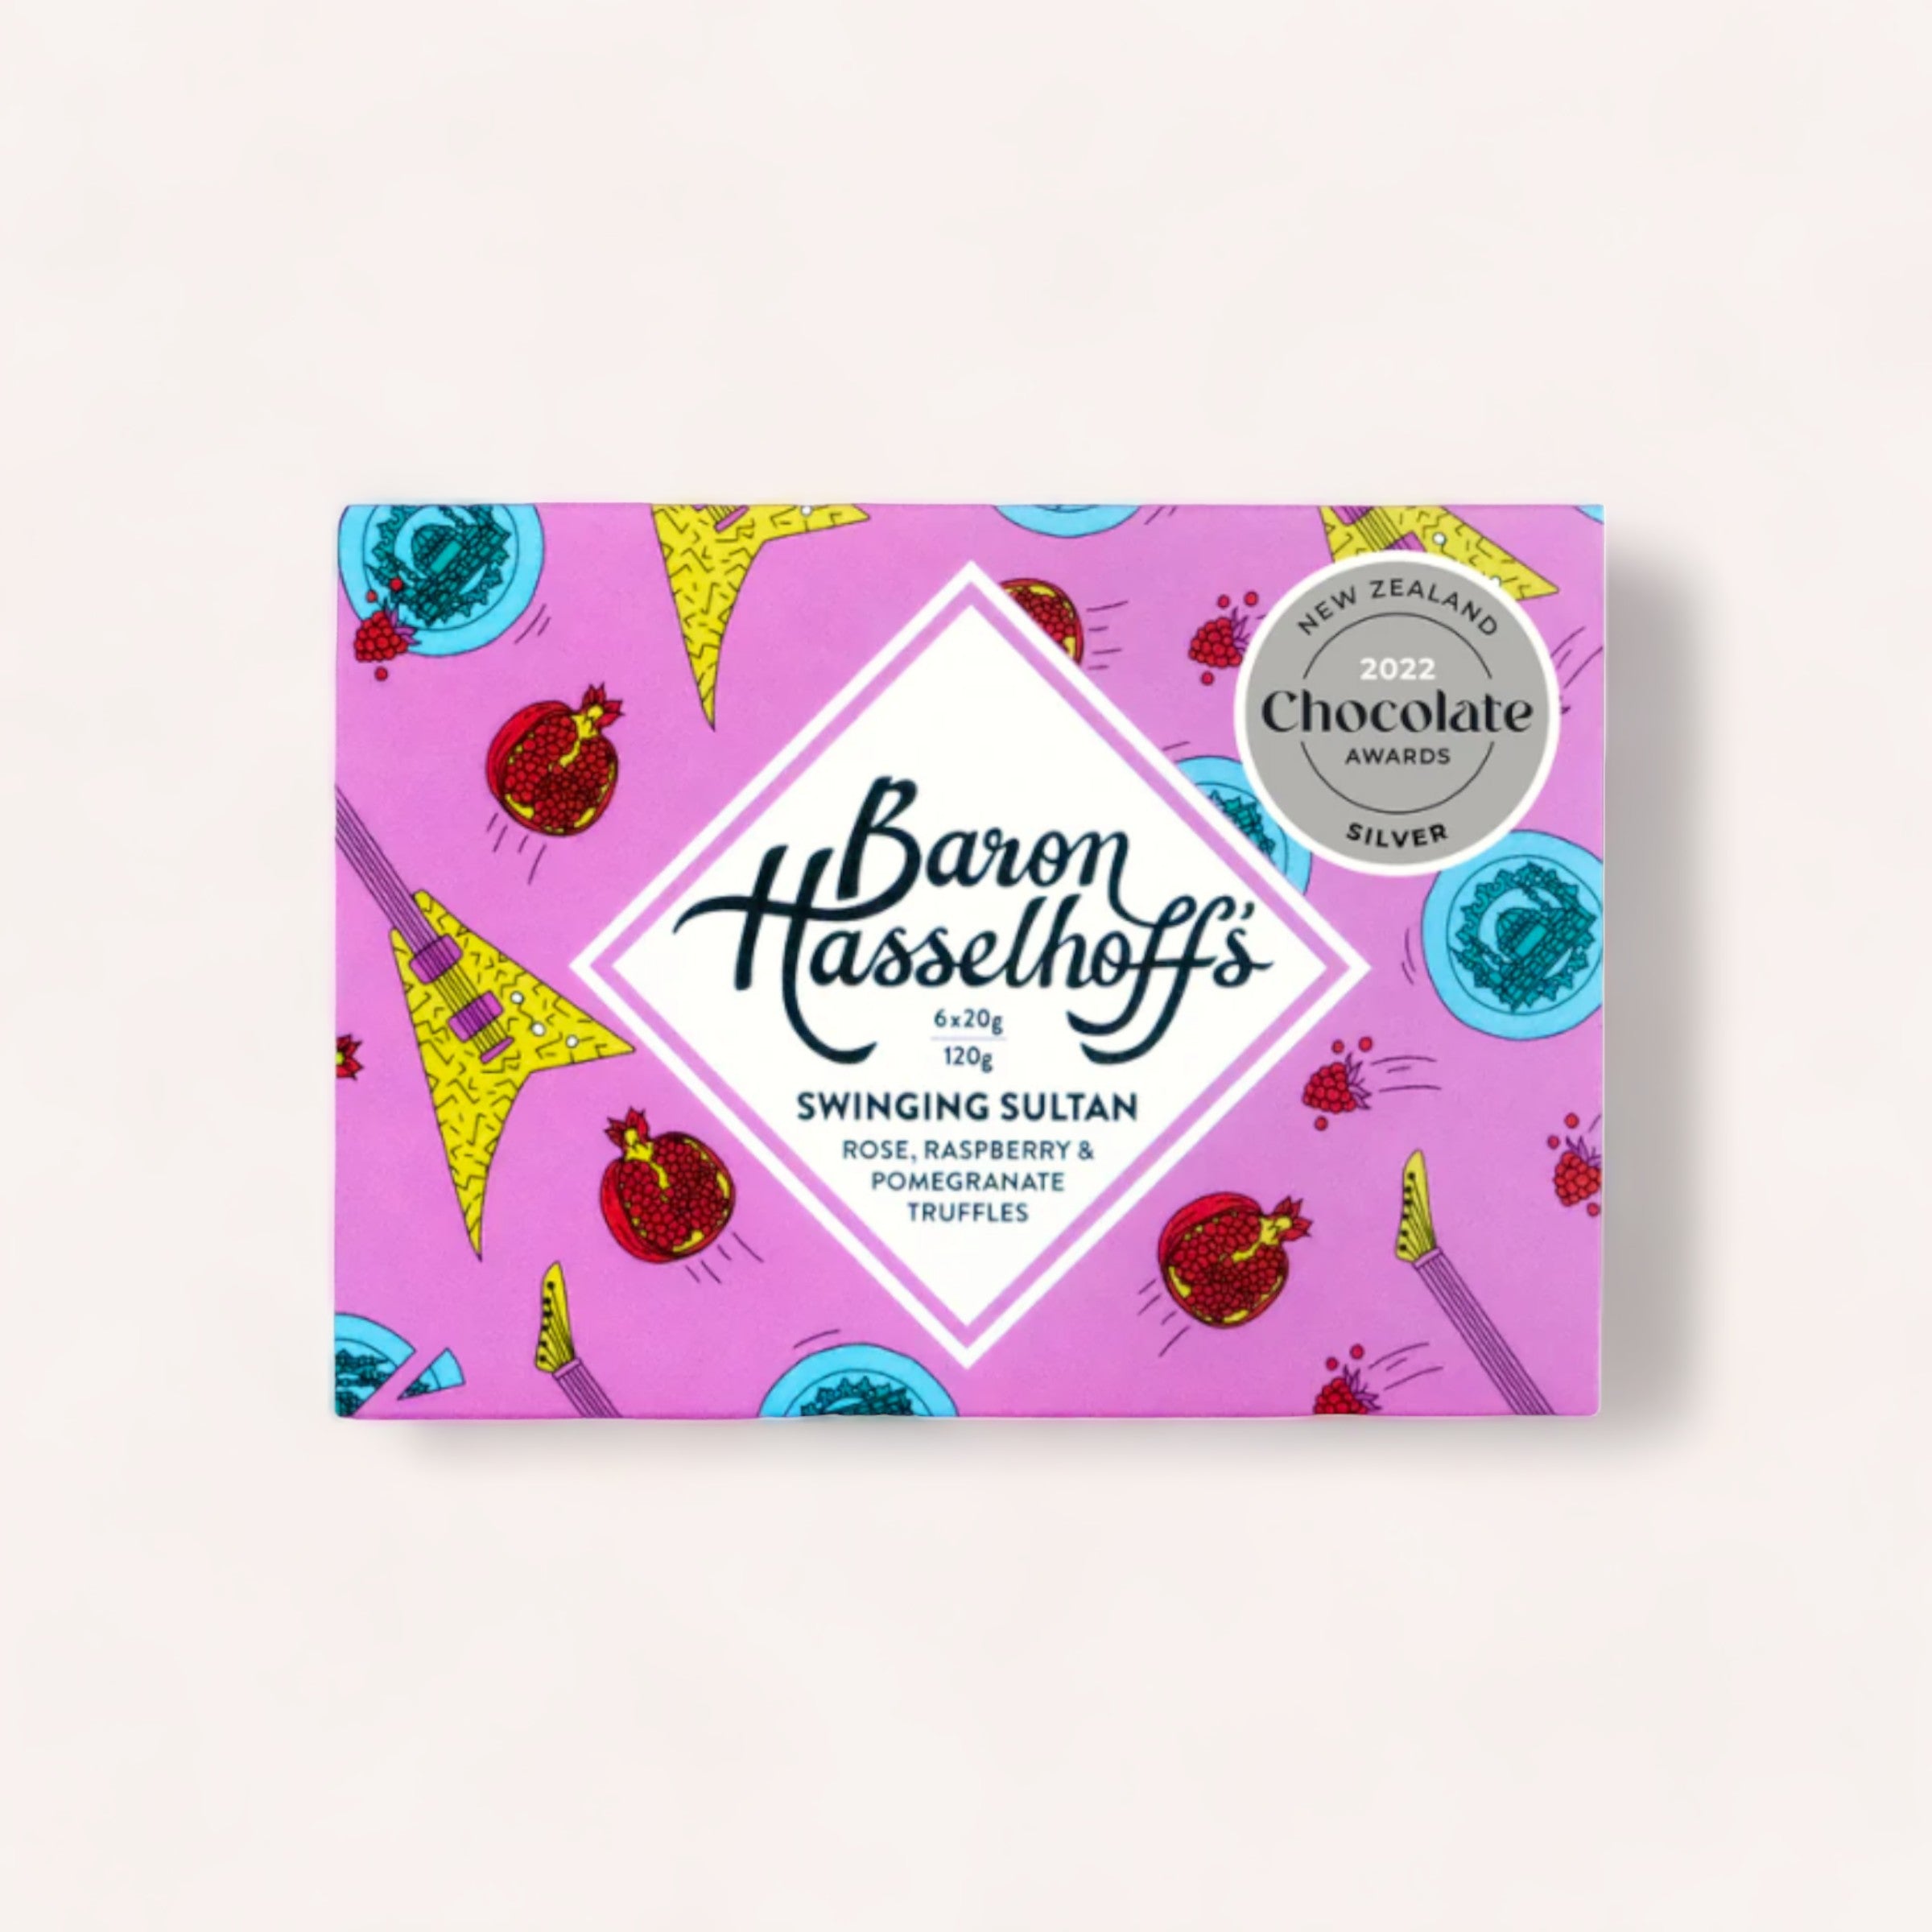 A colorful Swinging Sultan chocolate bar wrapper featuring the brand "Baron Hasselhoff's," with a flavor description of "rose raspberry pomegranate truffles," and an award seal indicating a silver prize from.